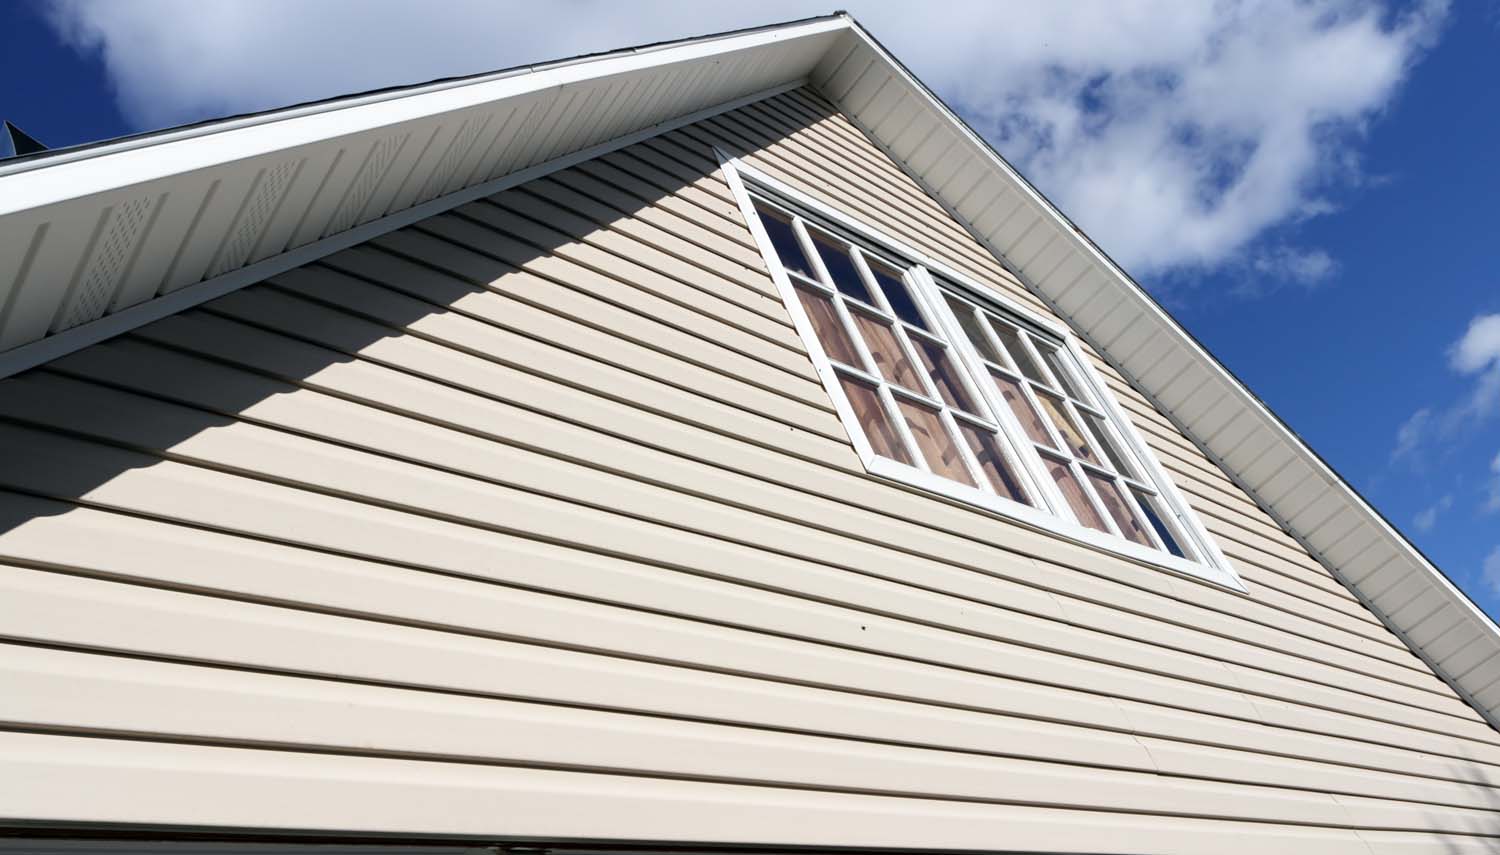 view looking at the vinyl siding on a house